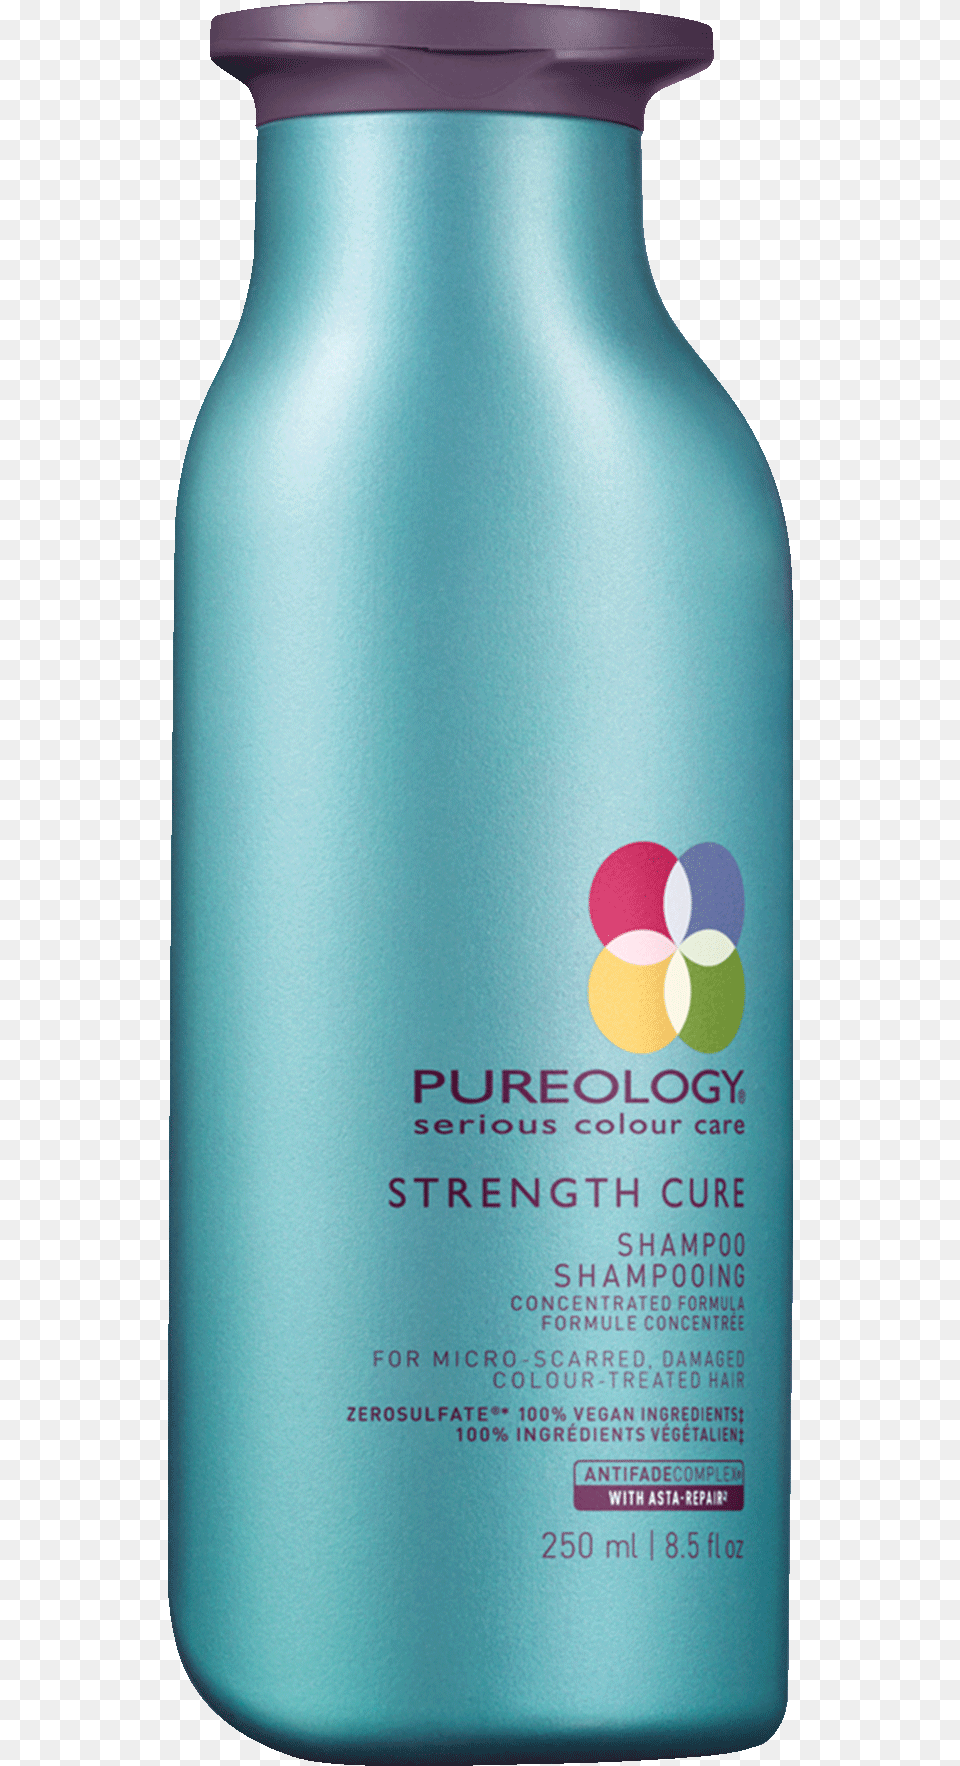 Pureology Strength Cure, Bottle, Jar, Can, Tin Png